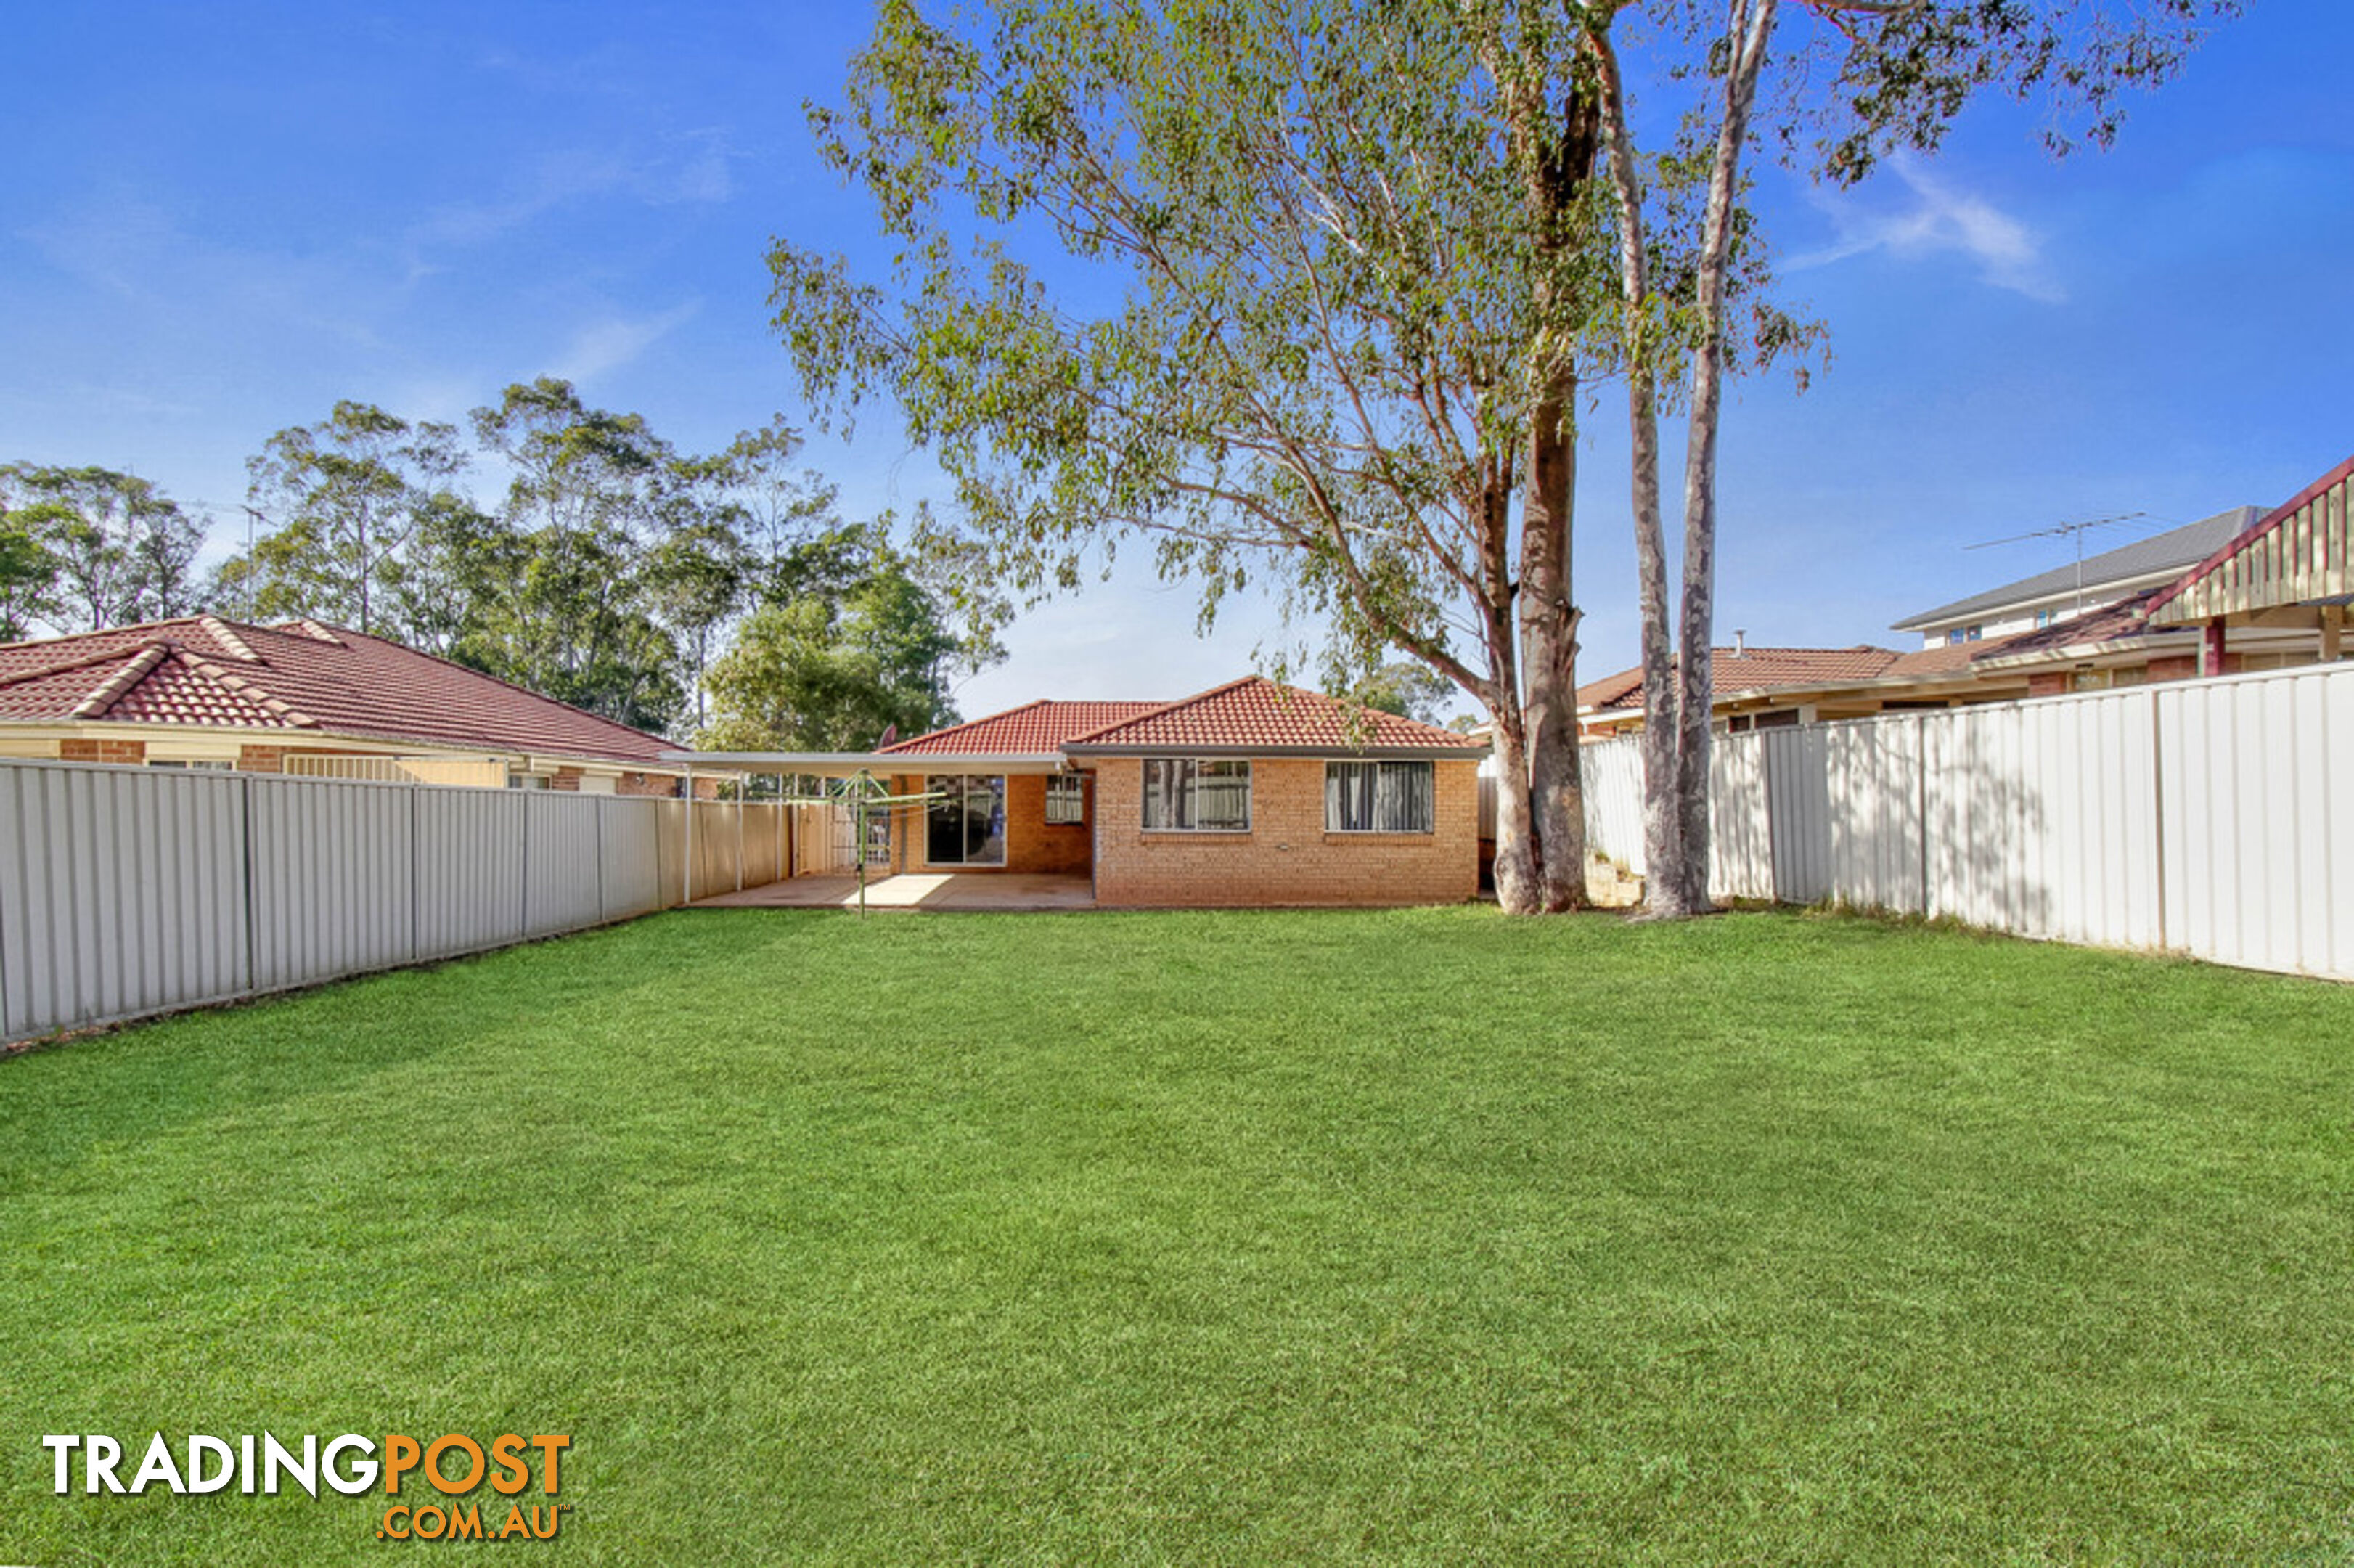 57 Starling St GREEN VALLEY NSW 2168